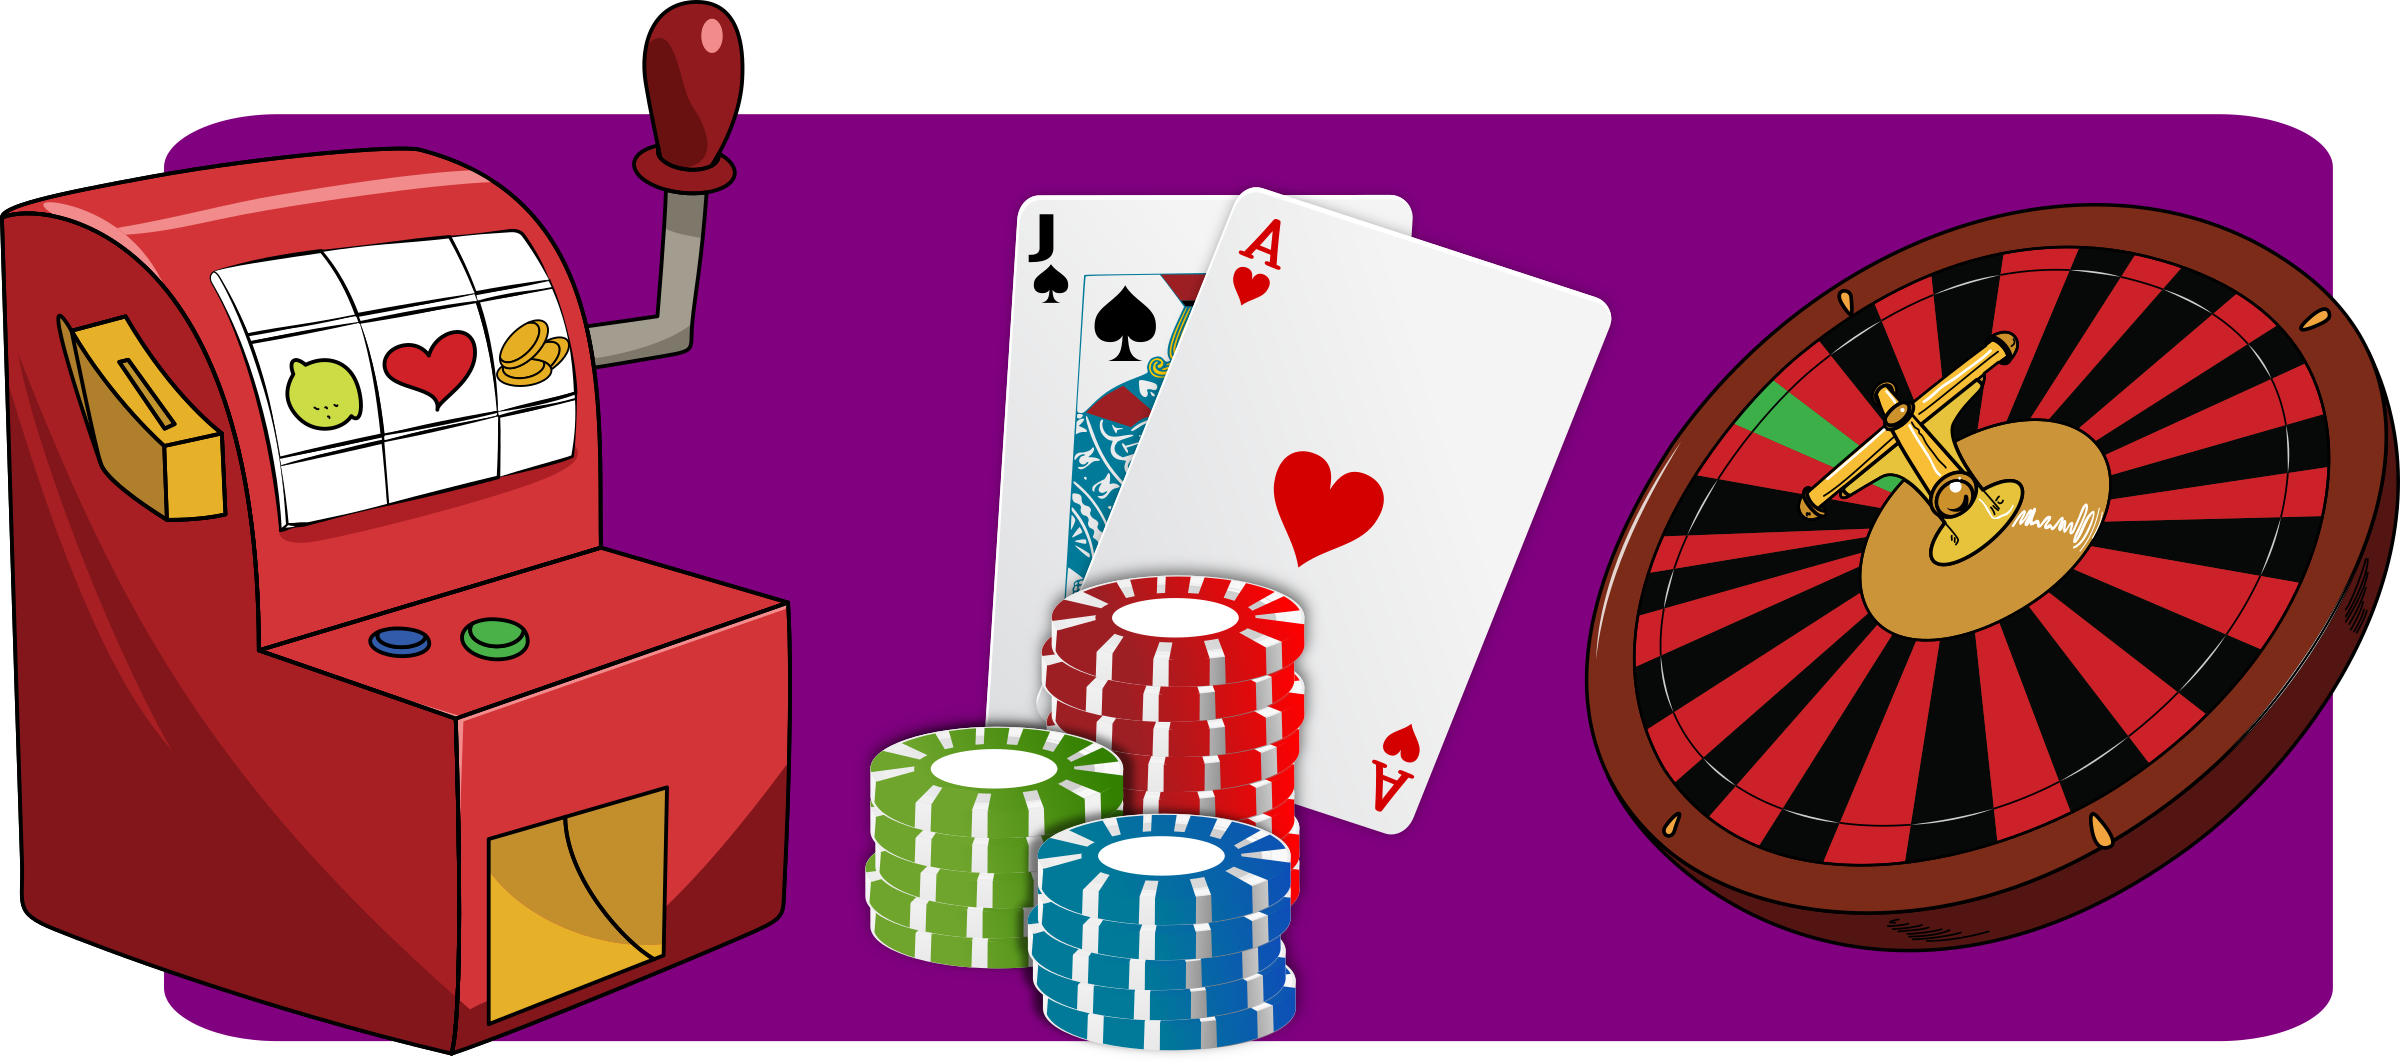 Slot Machines, cards, chips, and dart board vector clipart image - Free ...